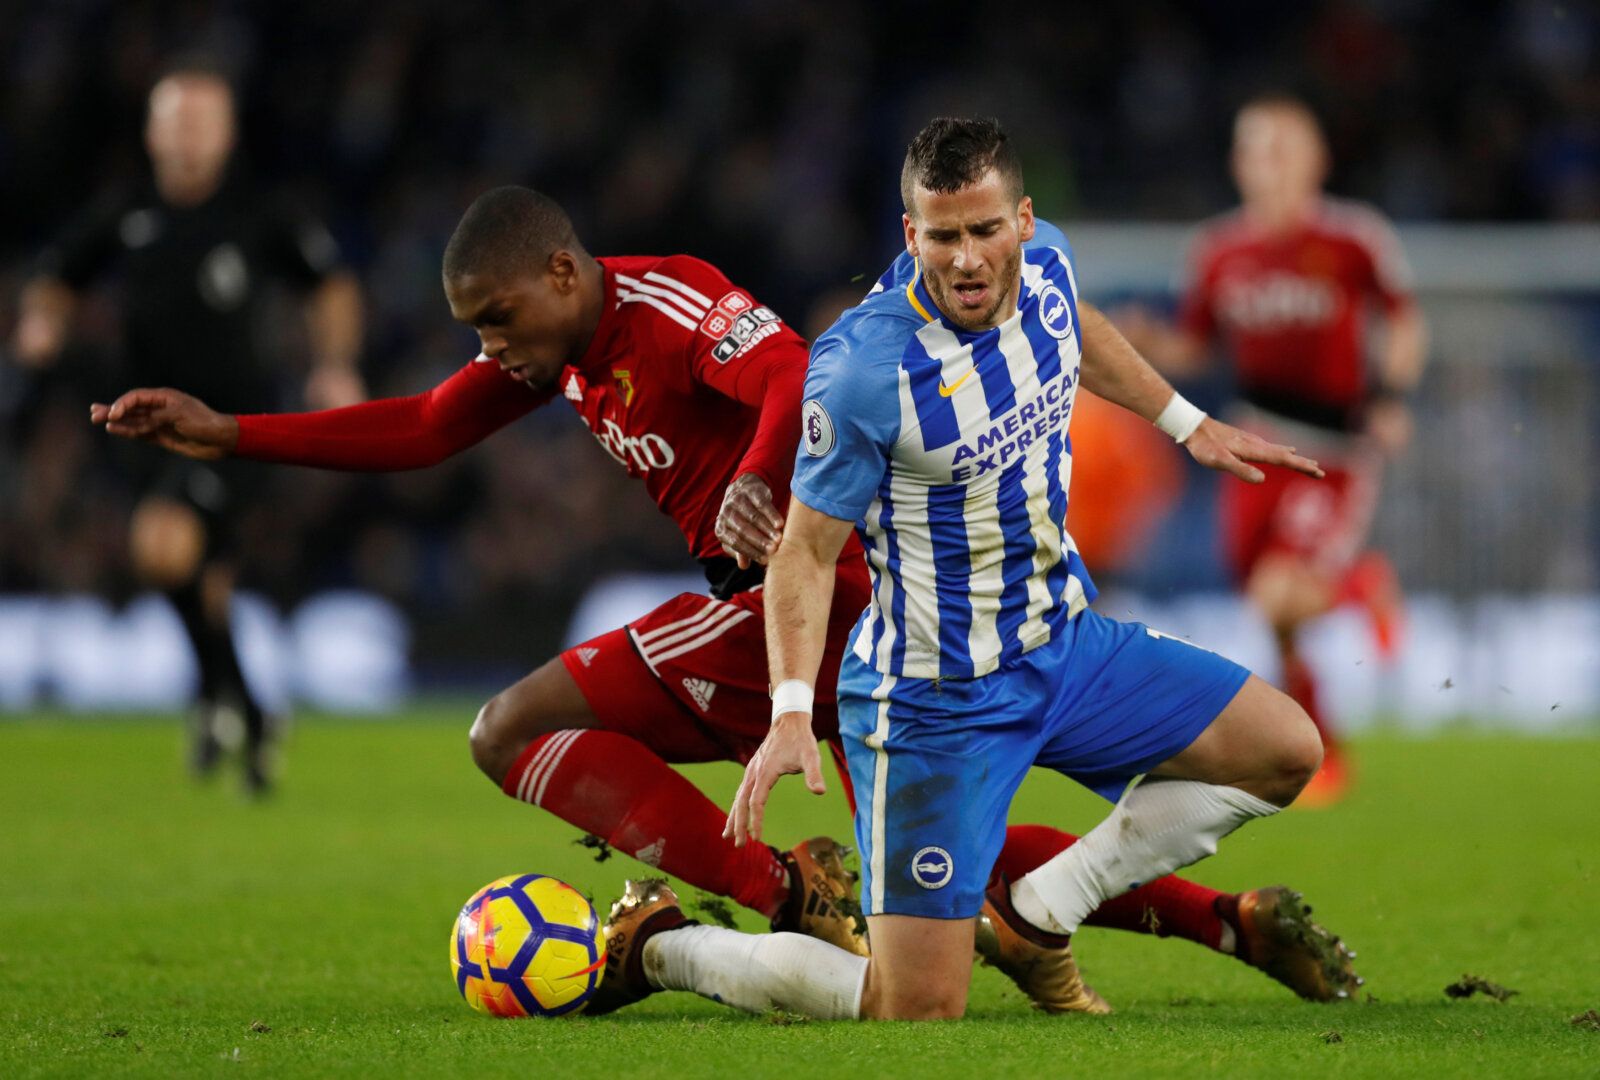 Soccer Football - Premier League - Brighton &amp; Hove Albion vs Watford - The American Express Community Stadium, Brighton, Britain - December 23, 2017   Watford's Christian Kabasele in action with Brighton's Tomer Hemed    Action Images via Reuters/Matthew Childs    EDITORIAL USE ONLY. No use with unauthorized audio, video, data, fixture lists, club/league logos or 